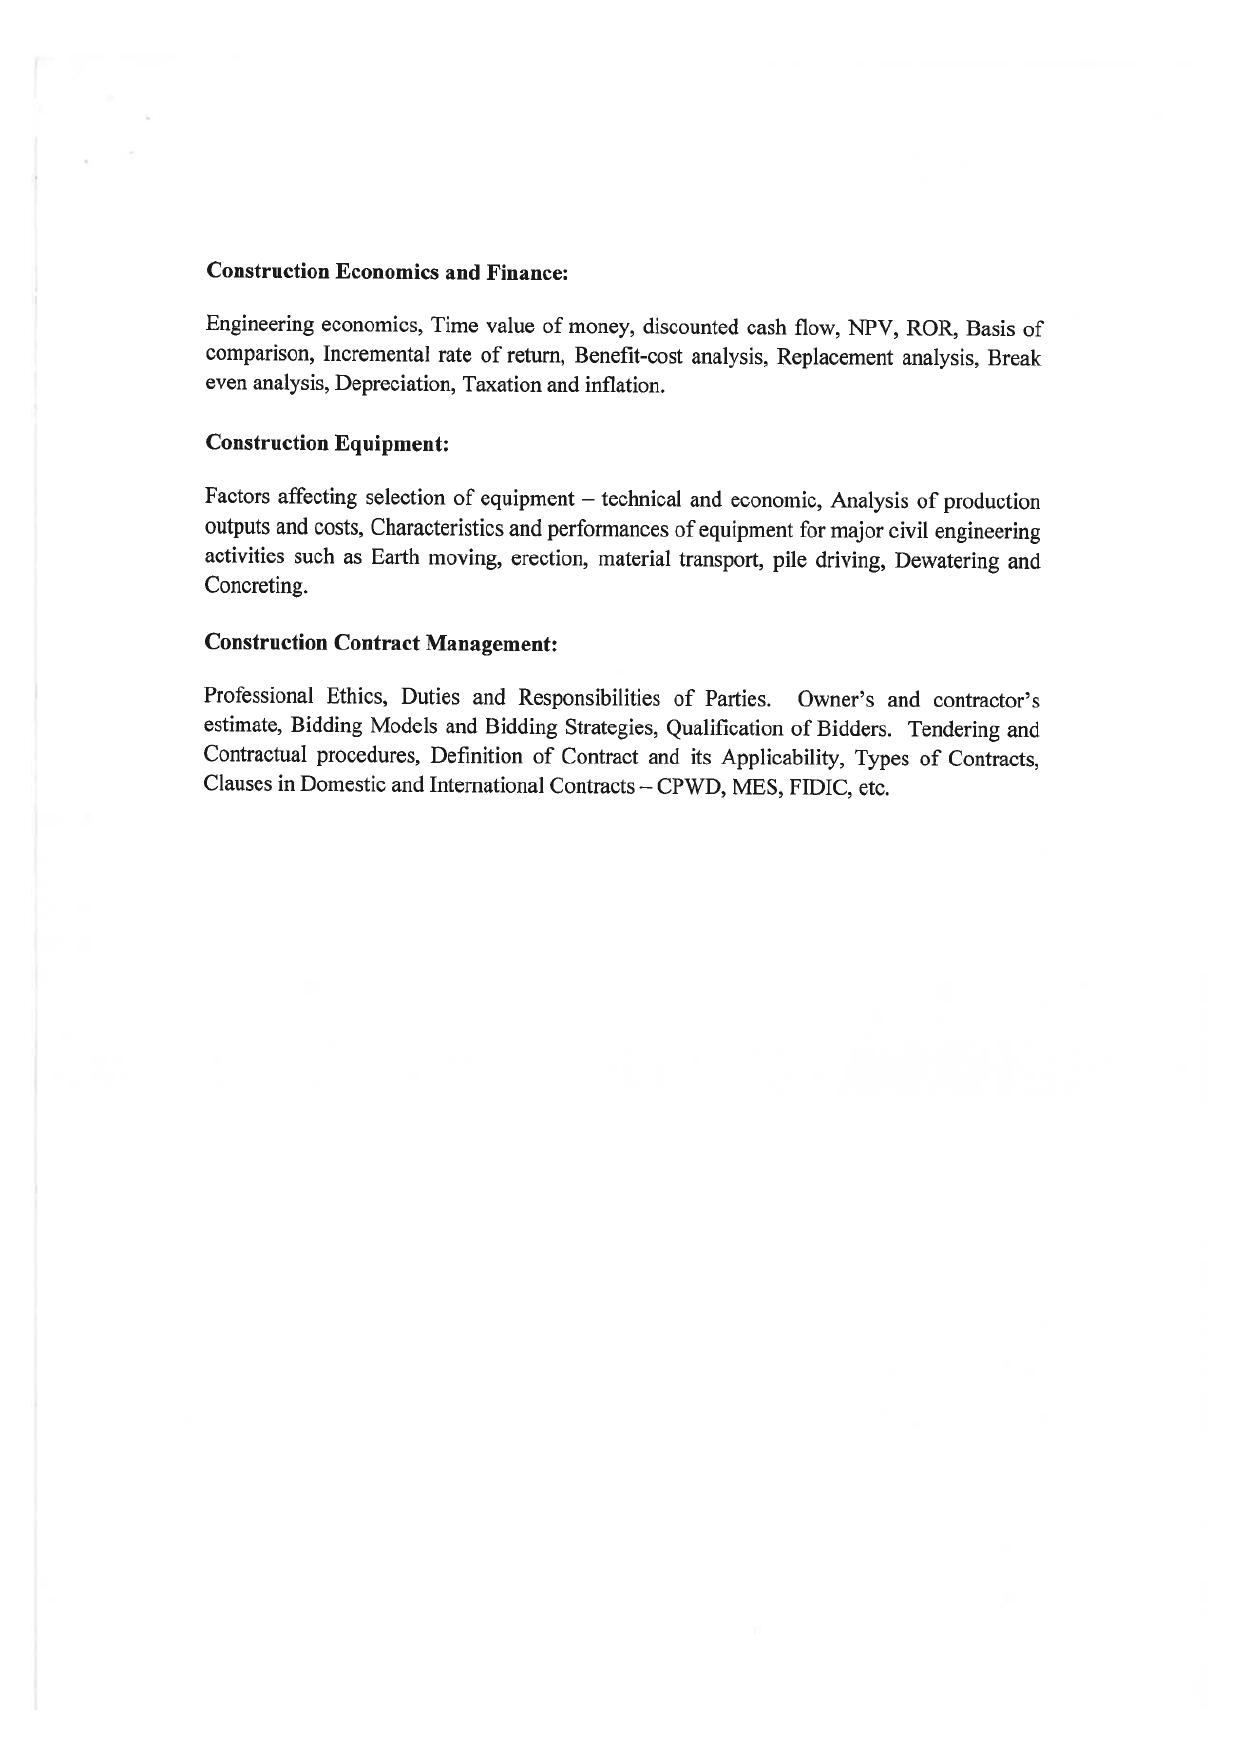 JMI Entrance Exam FACULTY OF ENGINEERING & TECHNOLOGY Syllabus - Page 11